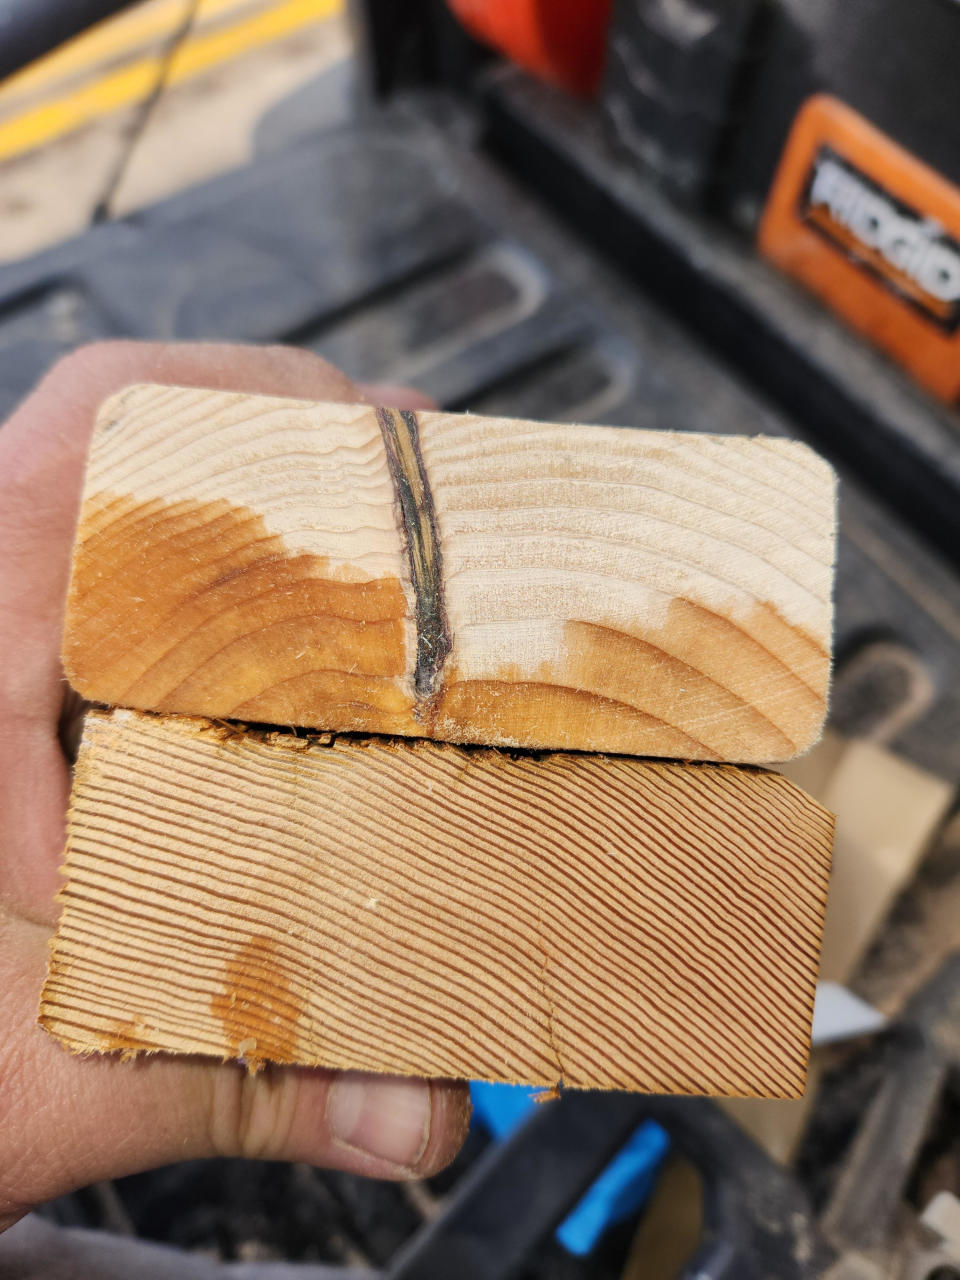 1950s wood has more striations/growth rings